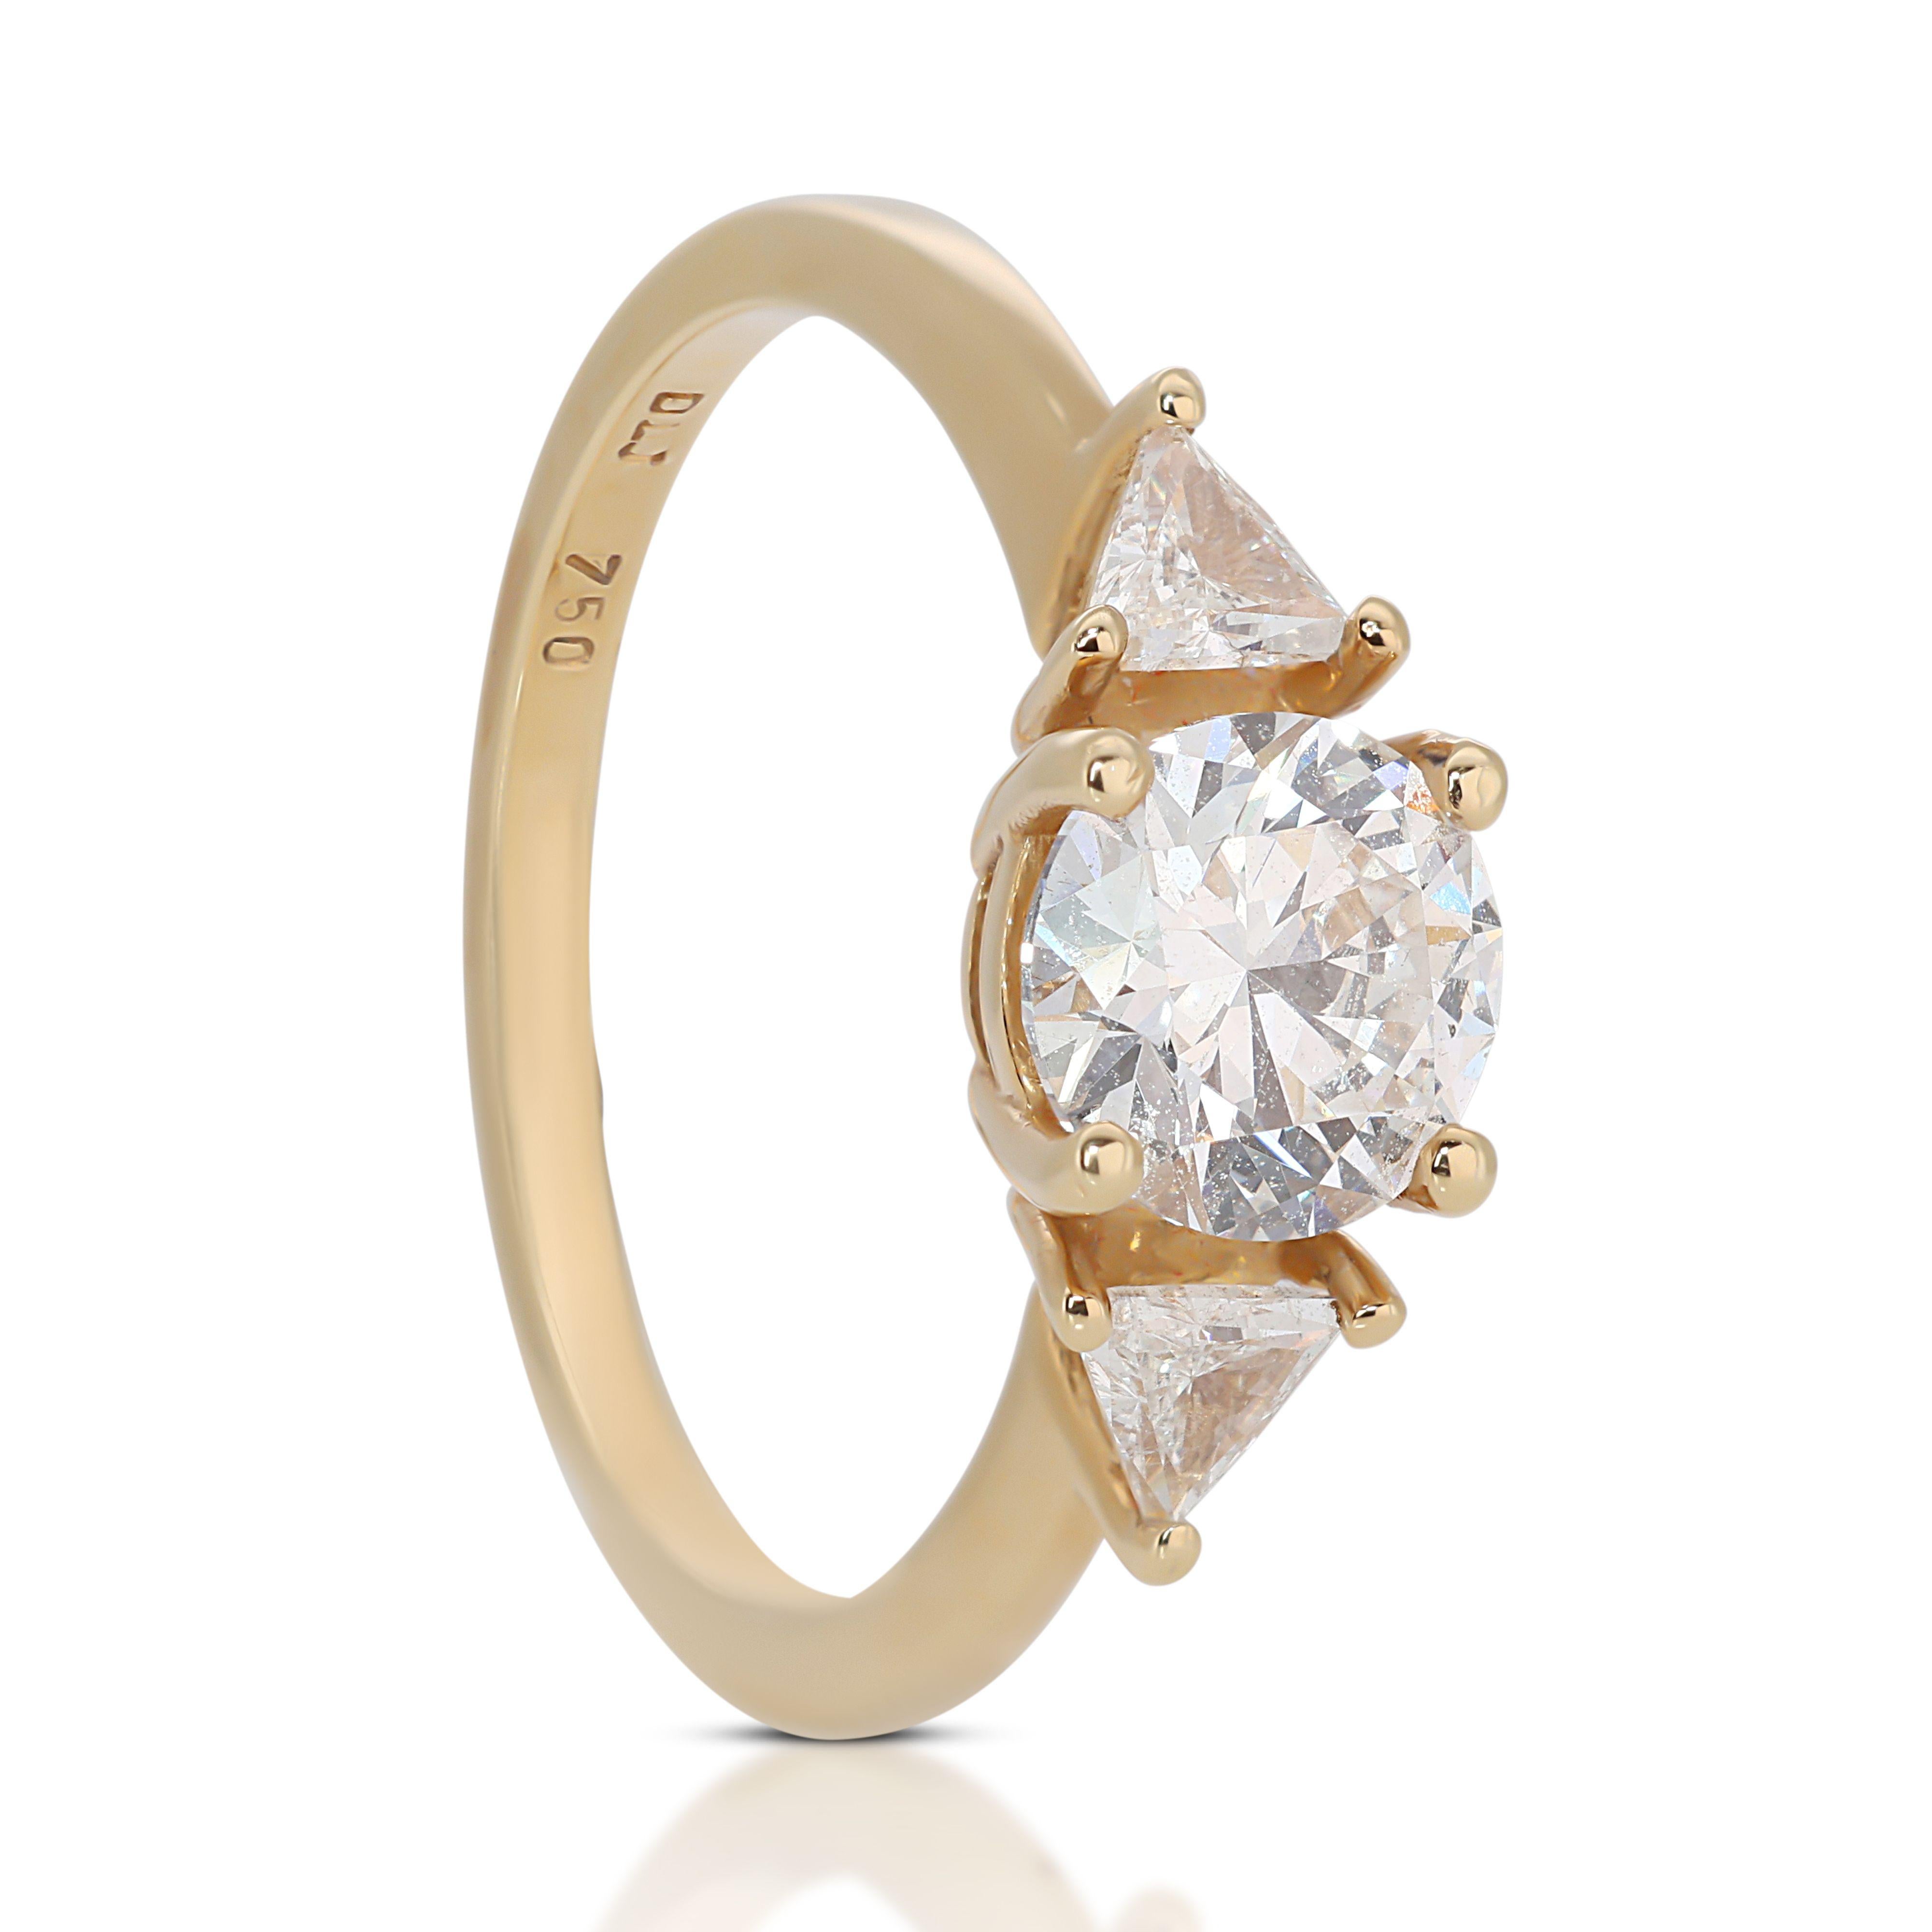 Captivating 3-stone 1.21ct Diamond Ring set in 18K Yellow Gold For Sale 3